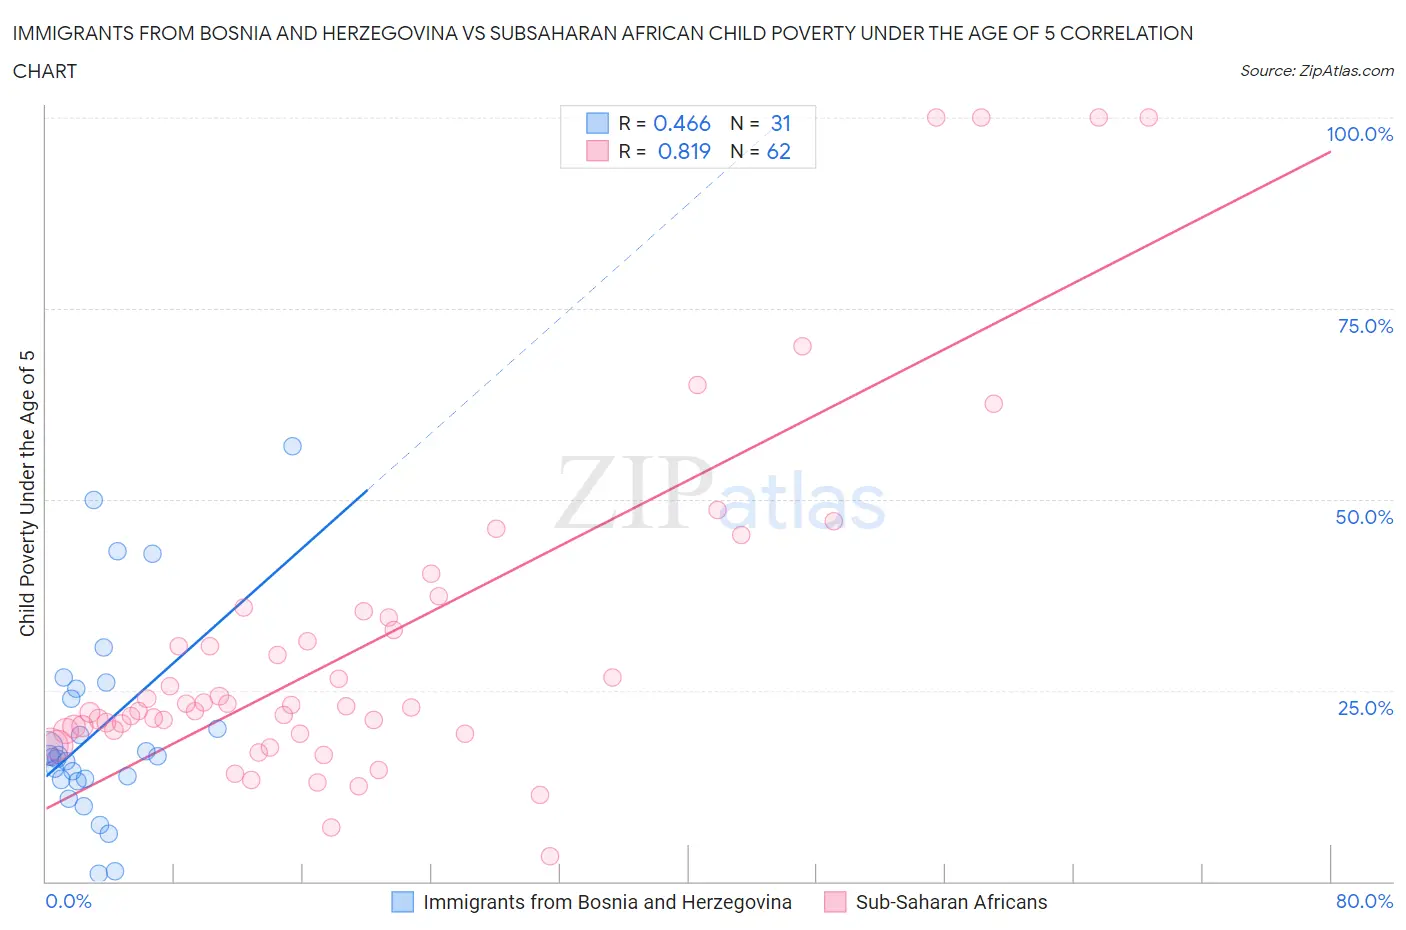 Immigrants from Bosnia and Herzegovina vs Subsaharan African Child Poverty Under the Age of 5